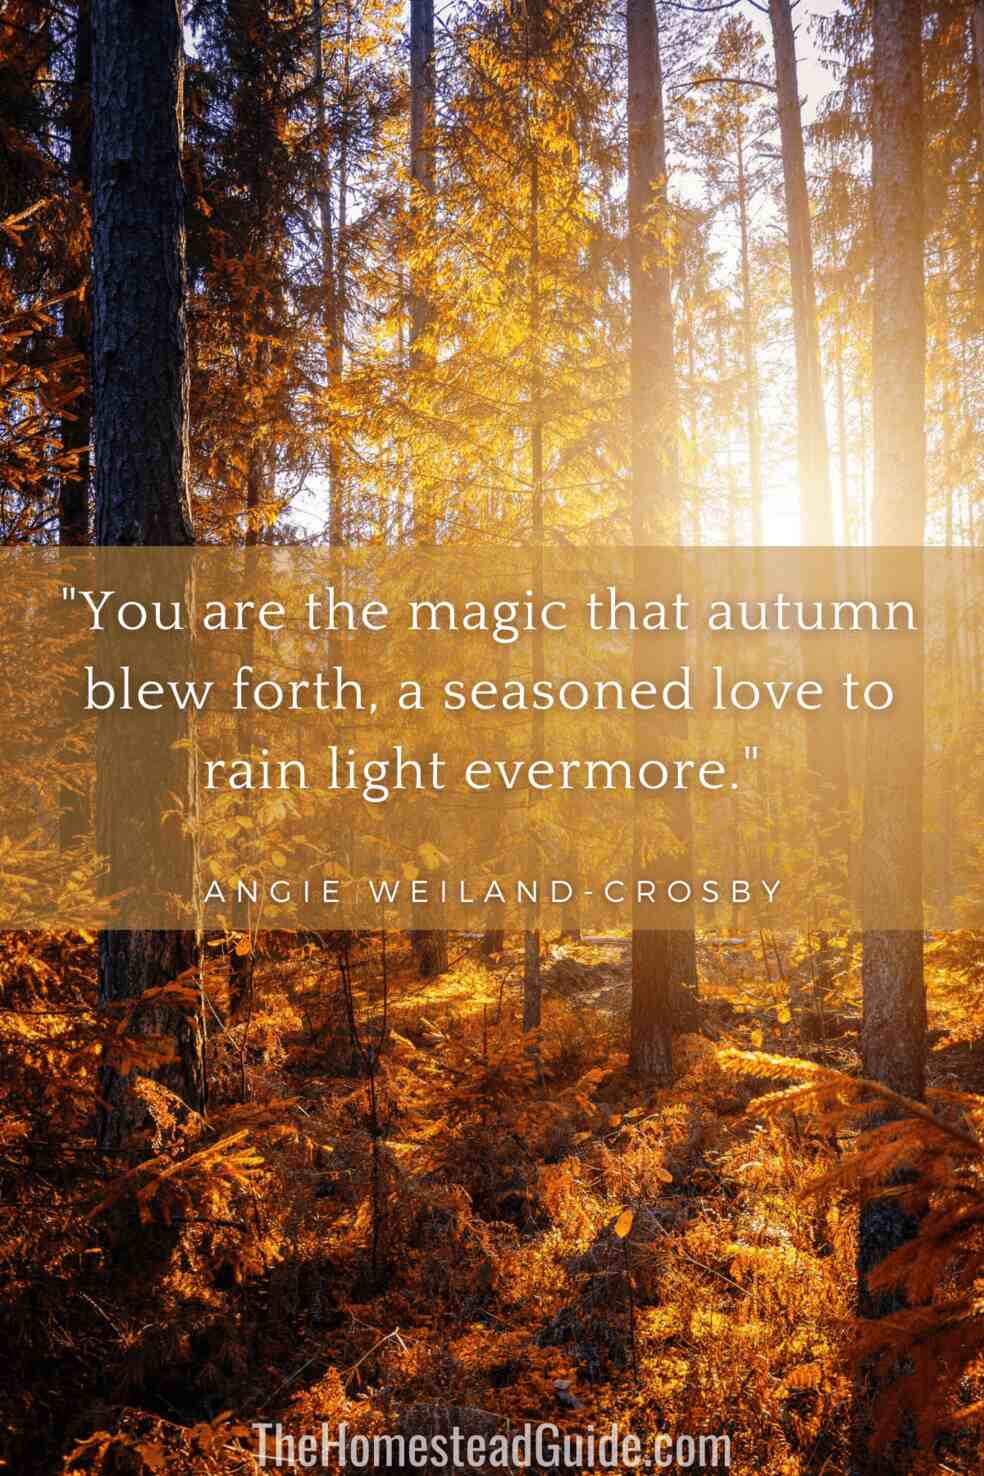 You are the magic that autumn blew forth, a seasoned love to rain light evermore. 